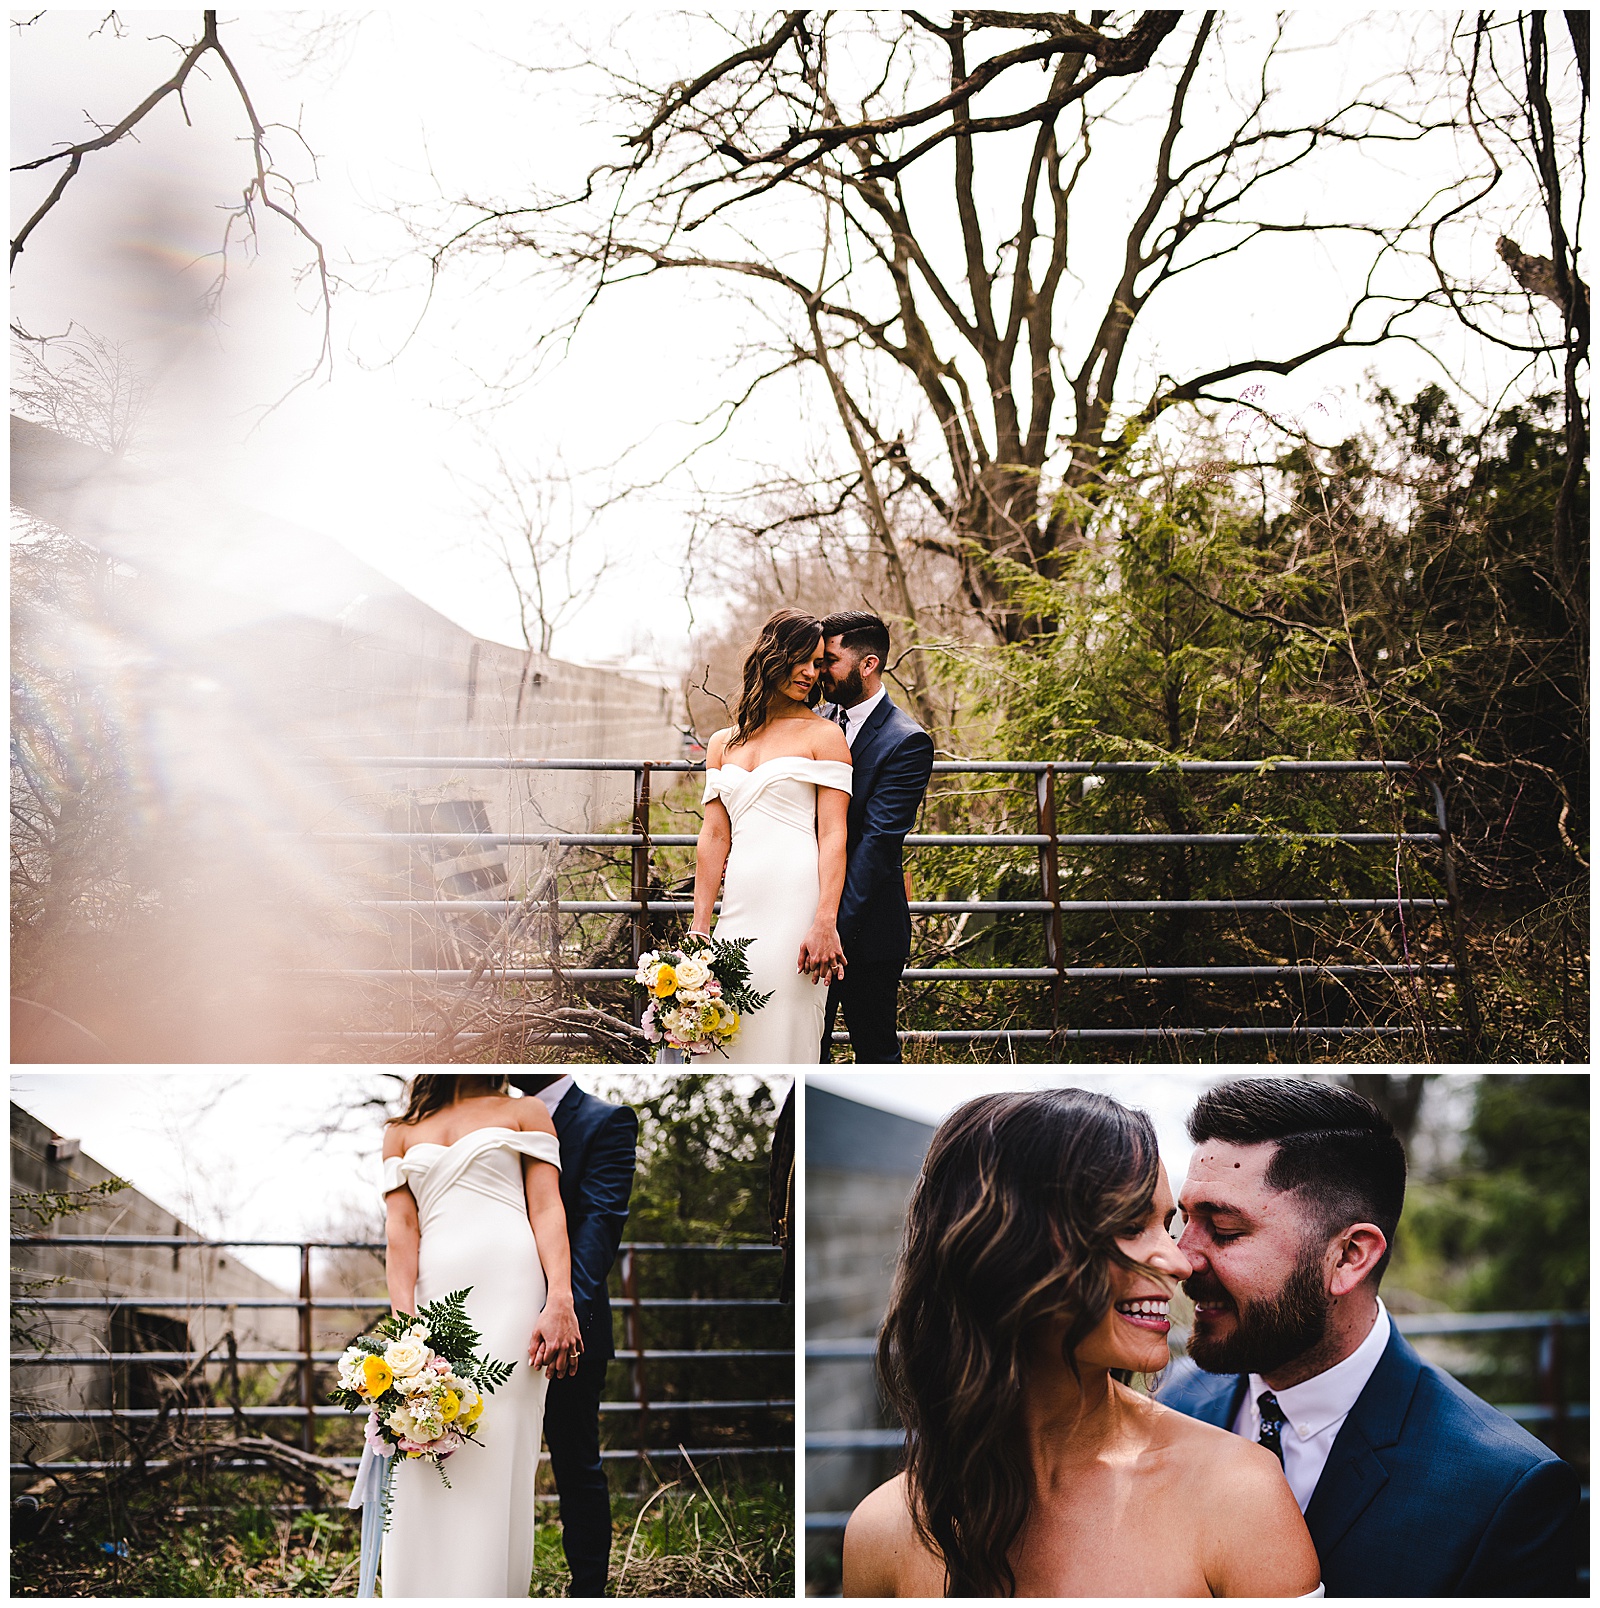 Intimate couples portraits with bohemian glam details. 